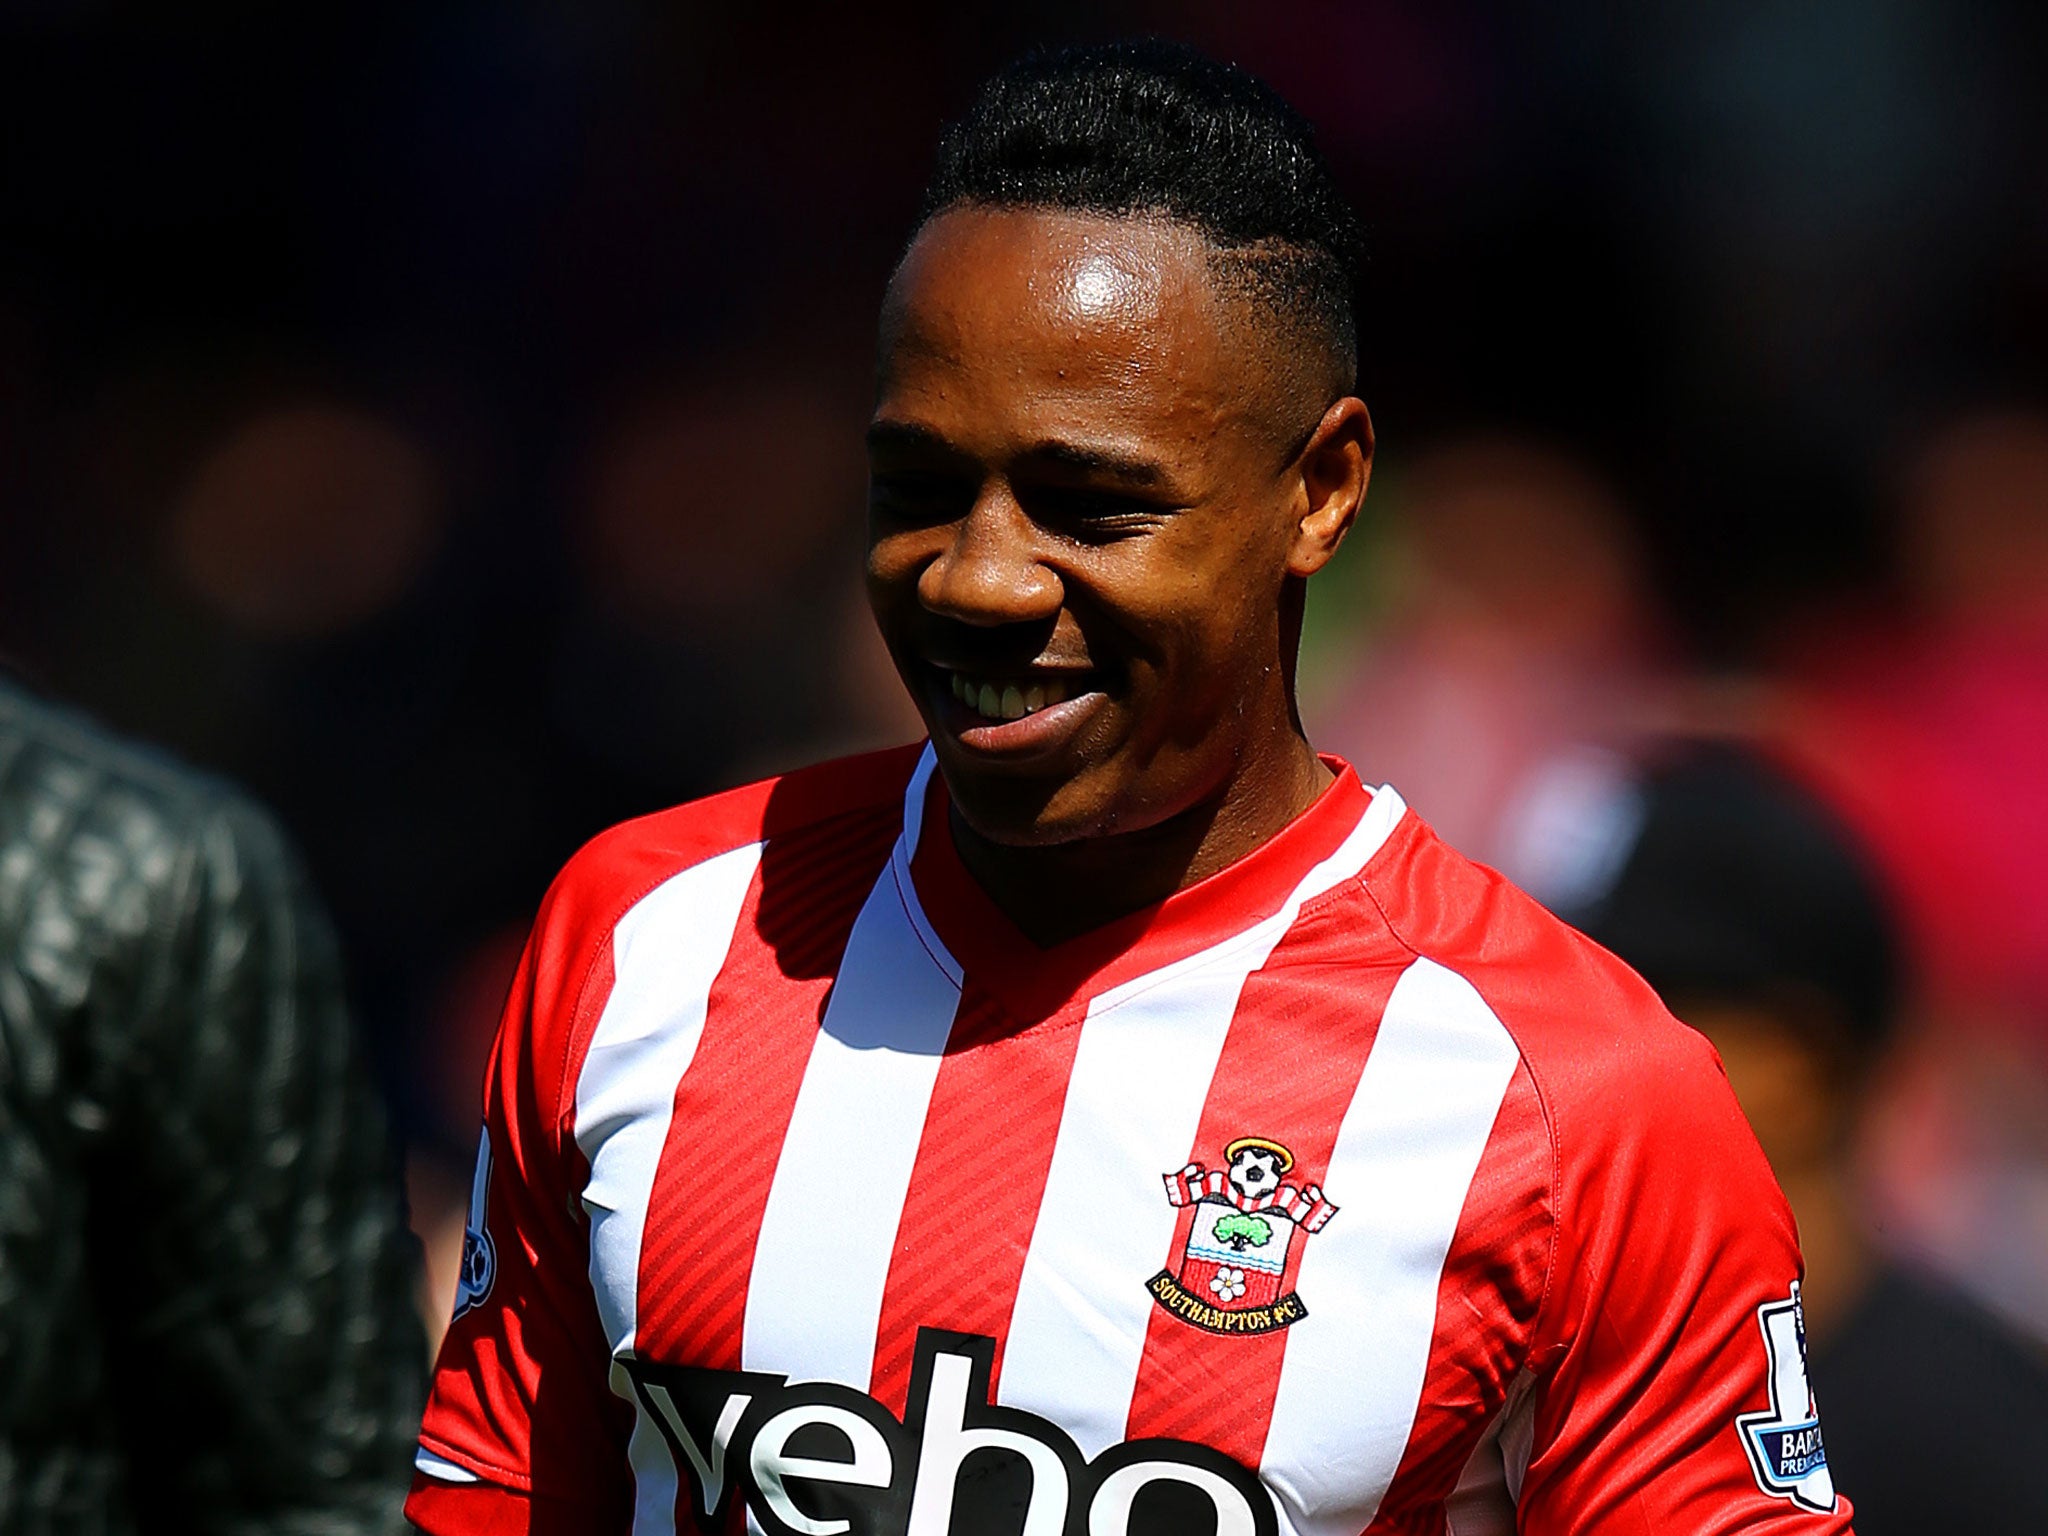 Nathaniel Clyne is believed to be nearing a switch to Liverpool